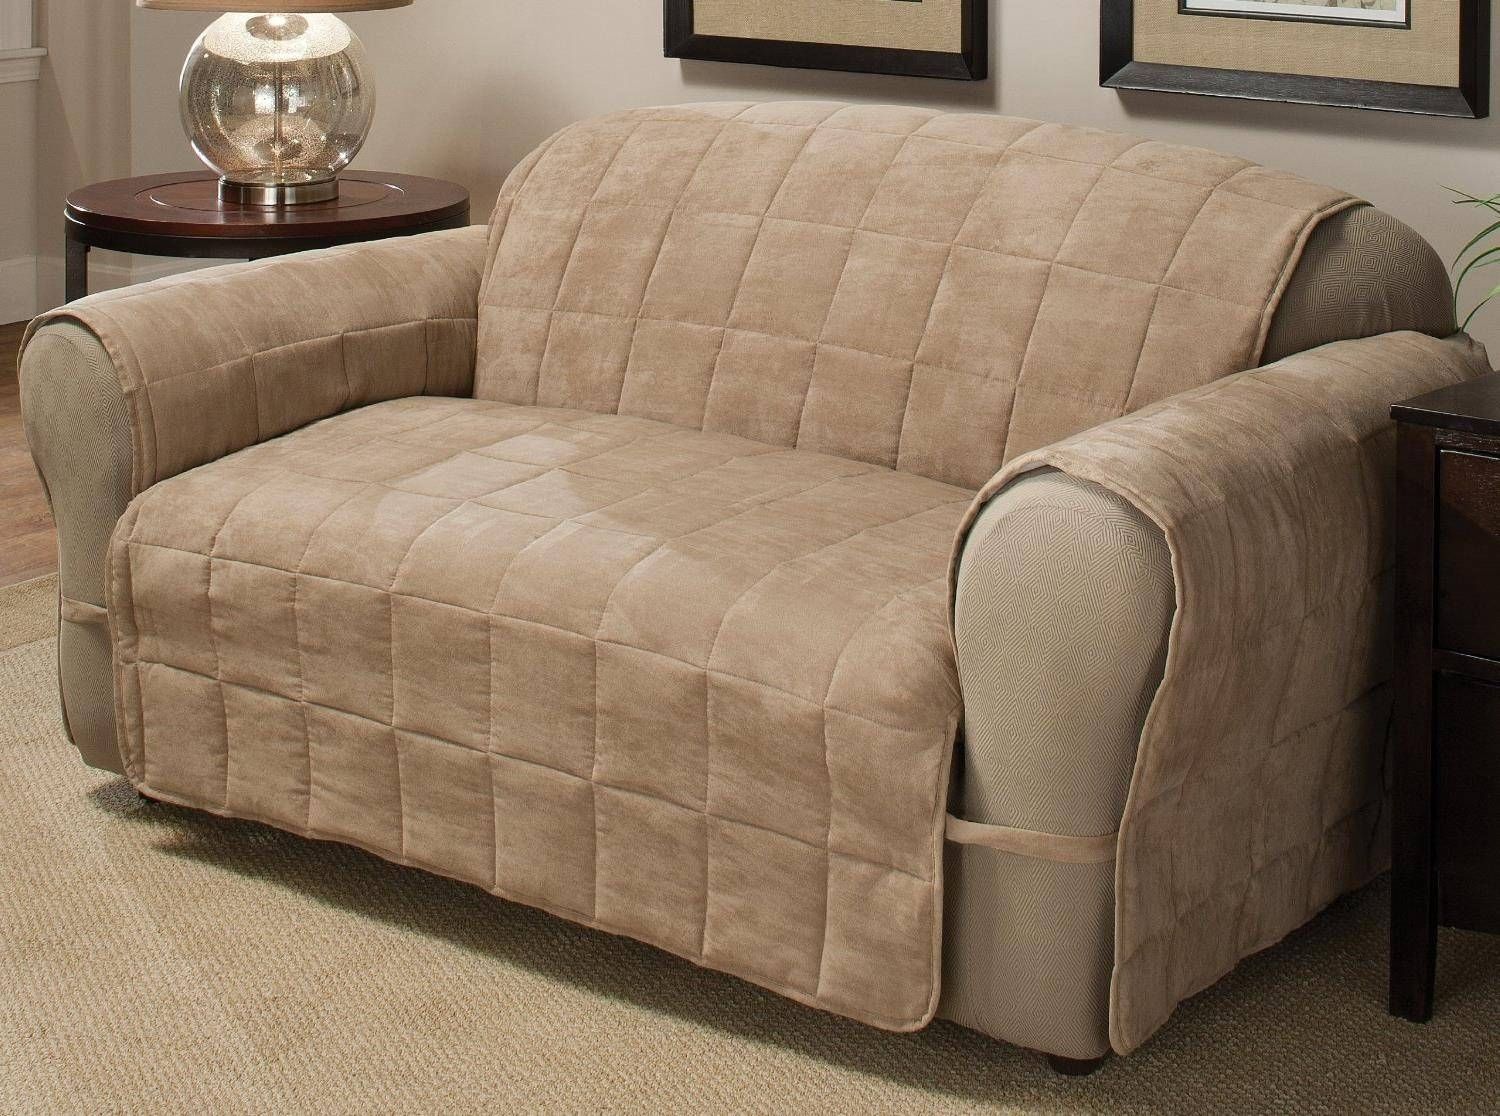 couch covers for leather sofa